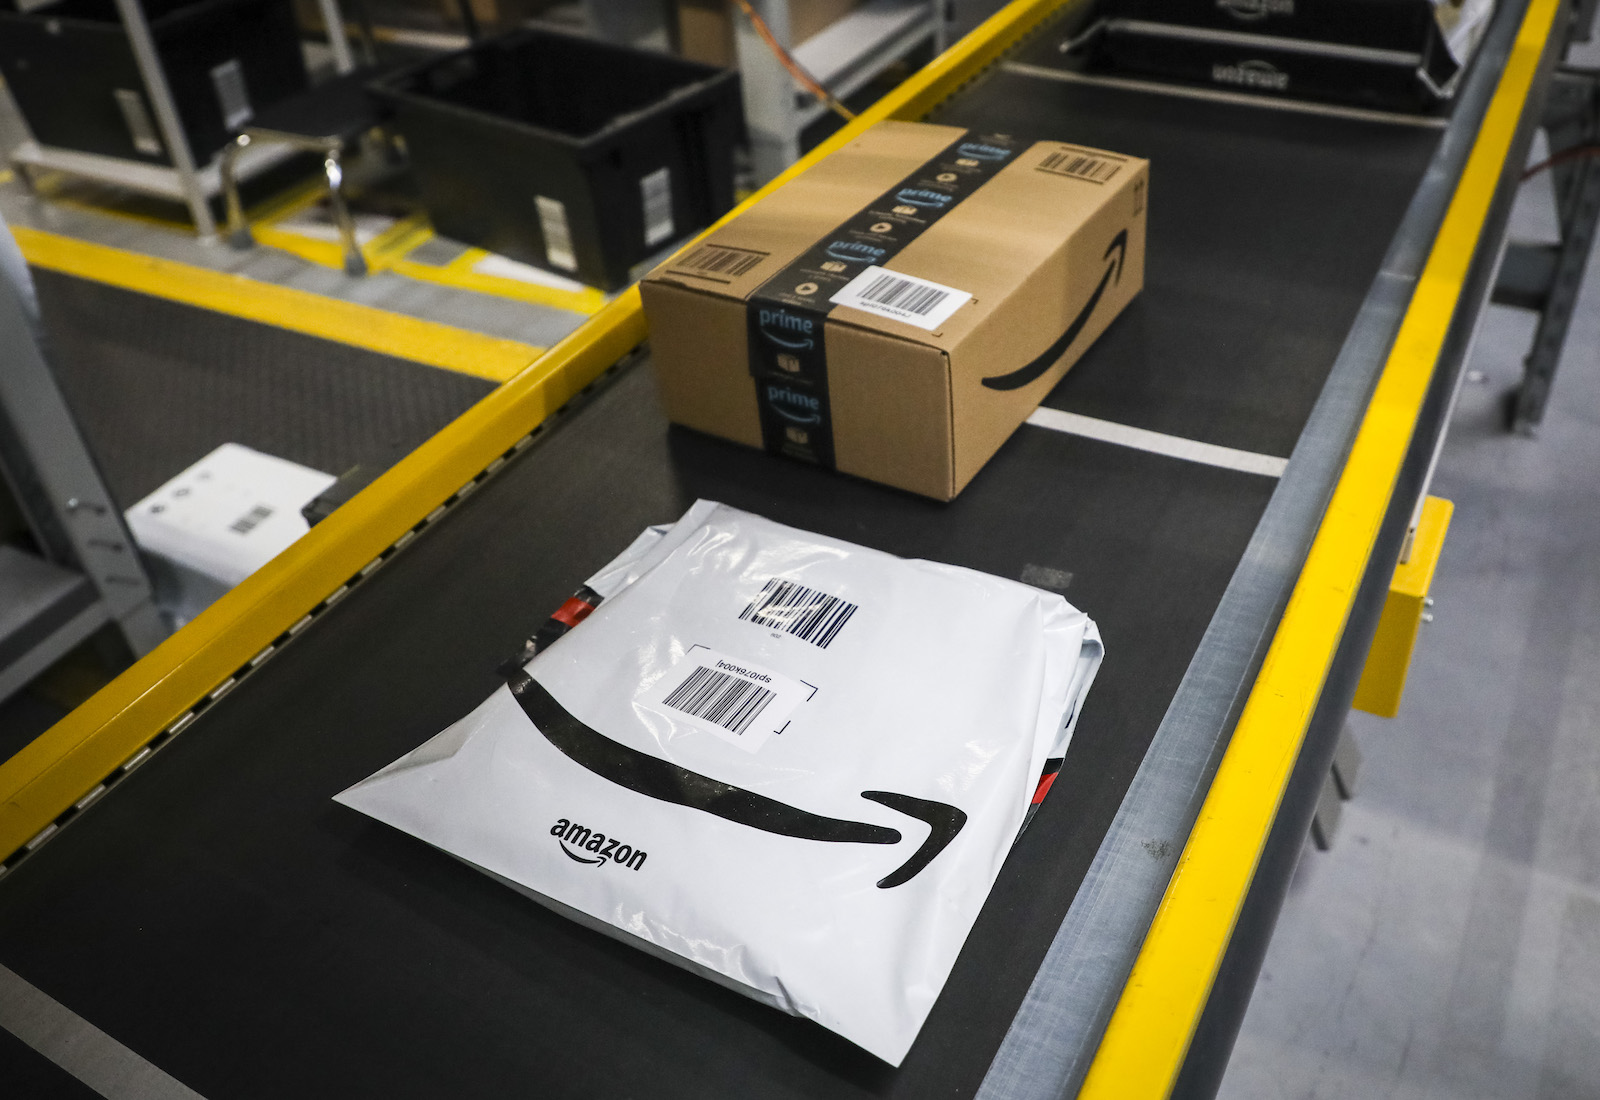 Amazon packages on a conveyor belt